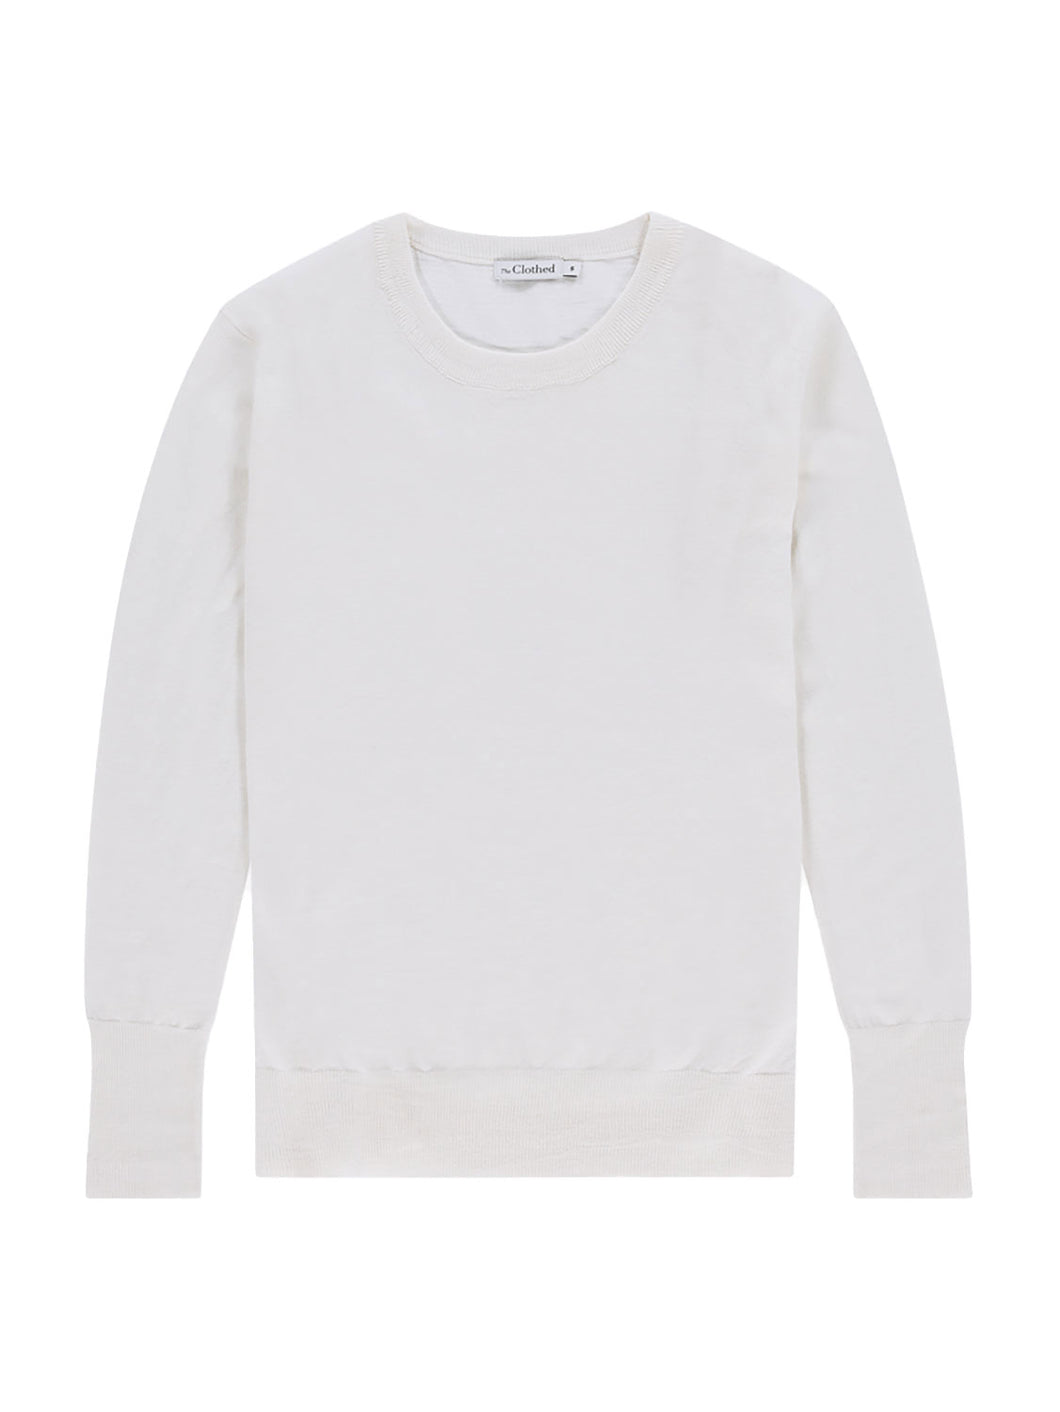 The Clothed Barcelona Merino Pull Off white